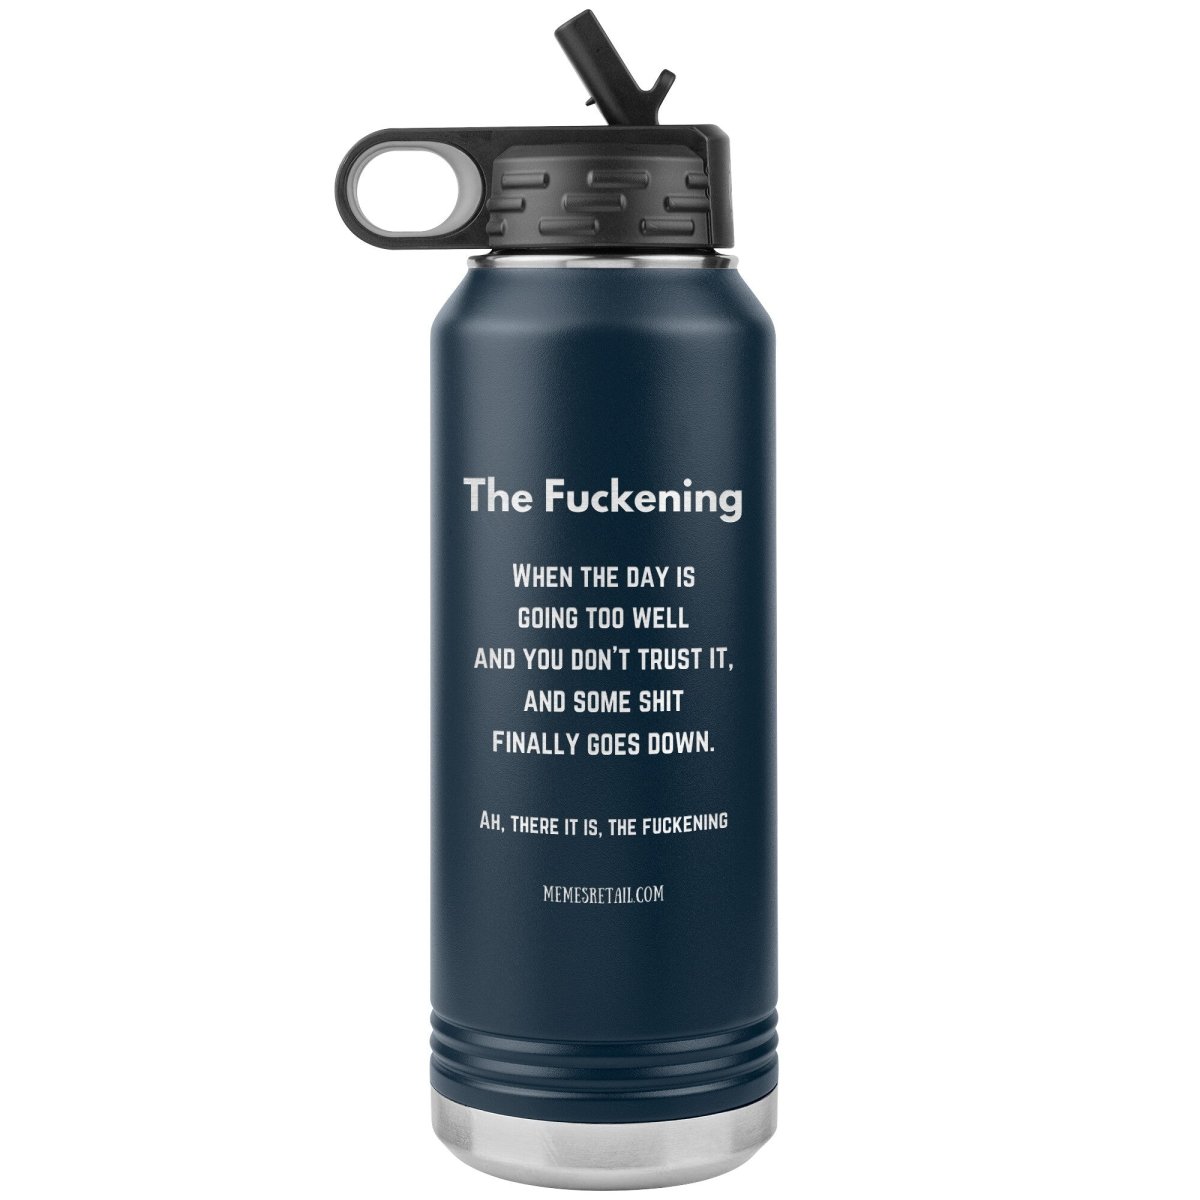 The Fuckening, When you don't trust the day. 32 oz Water Bottle, Navy - MemesRetail.com